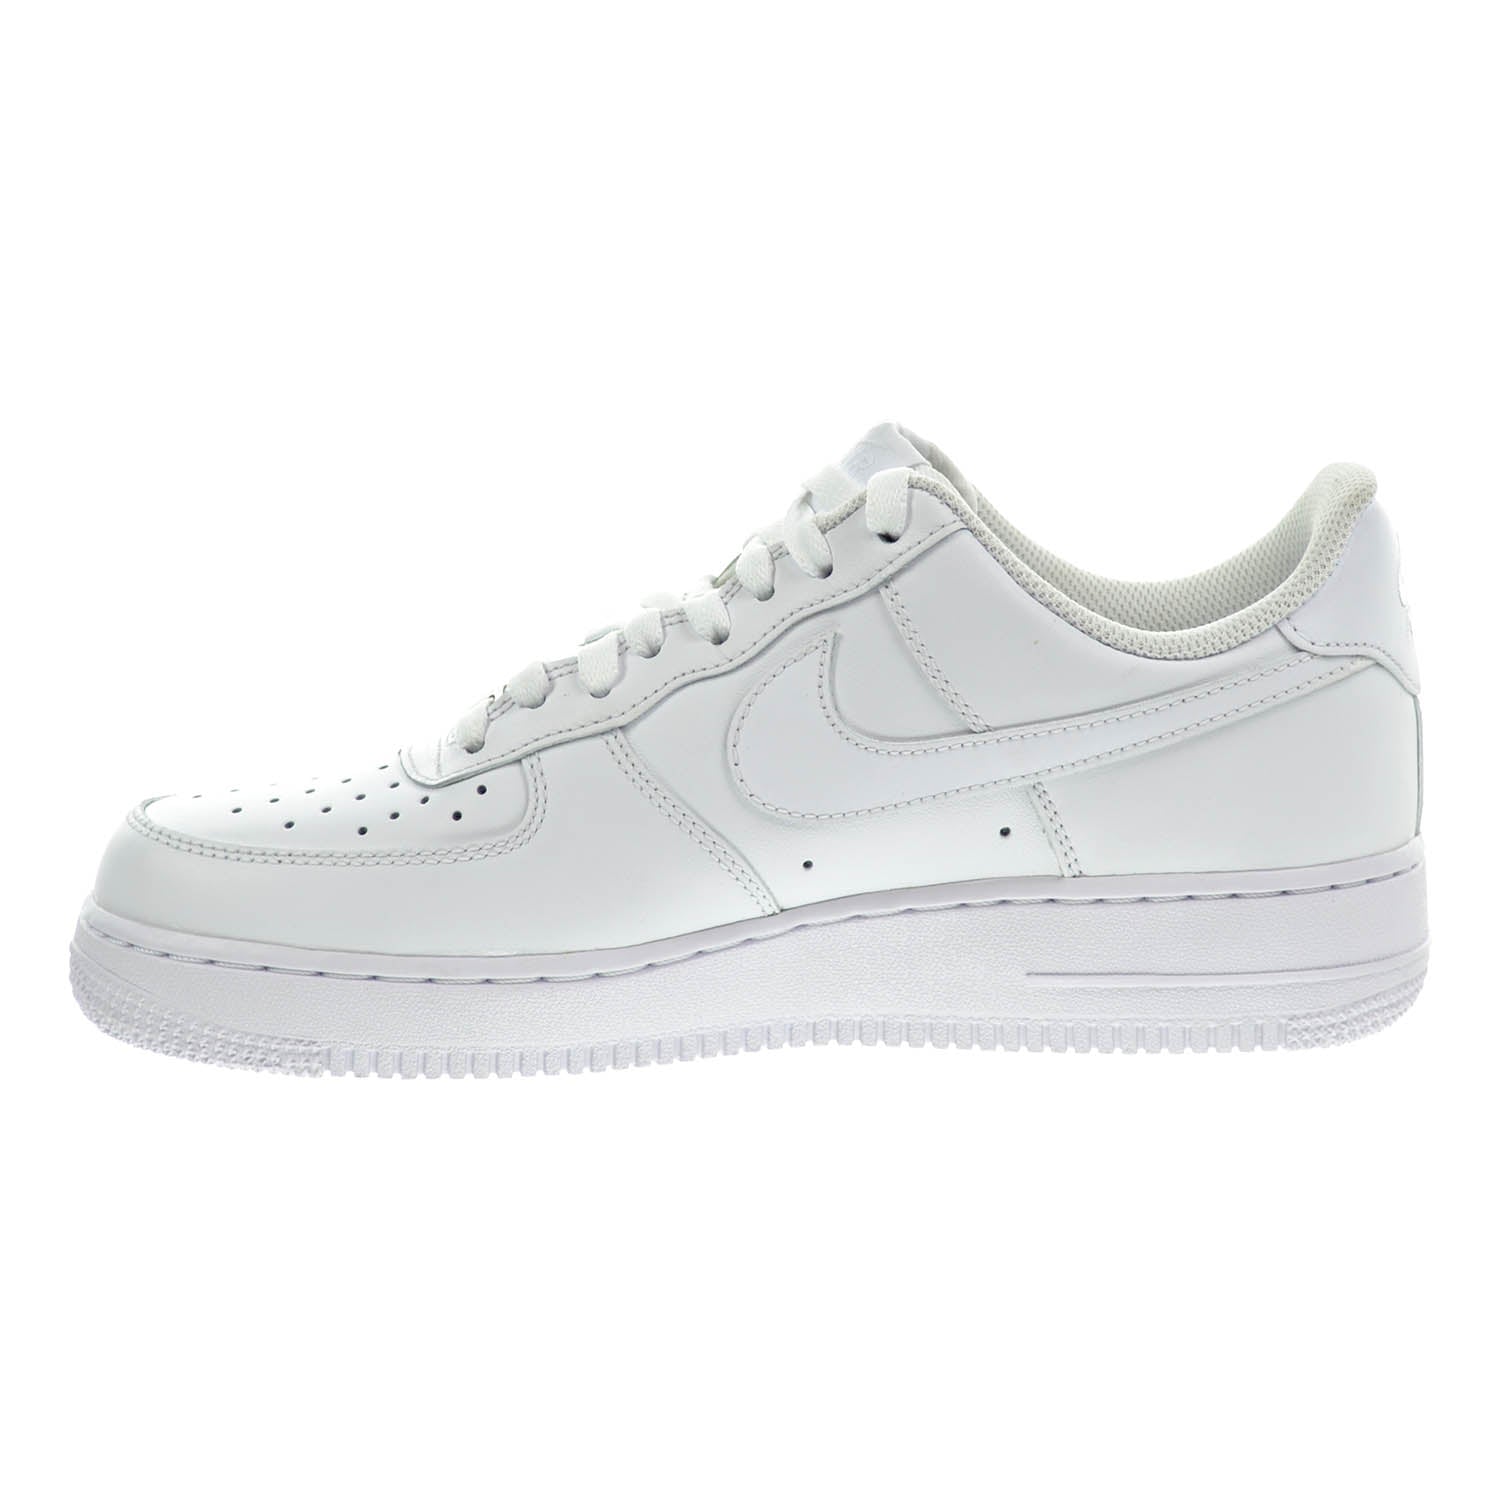 Nike Air Force 1 07 Lv8 Utility Shoes - Size 13 in White for Men